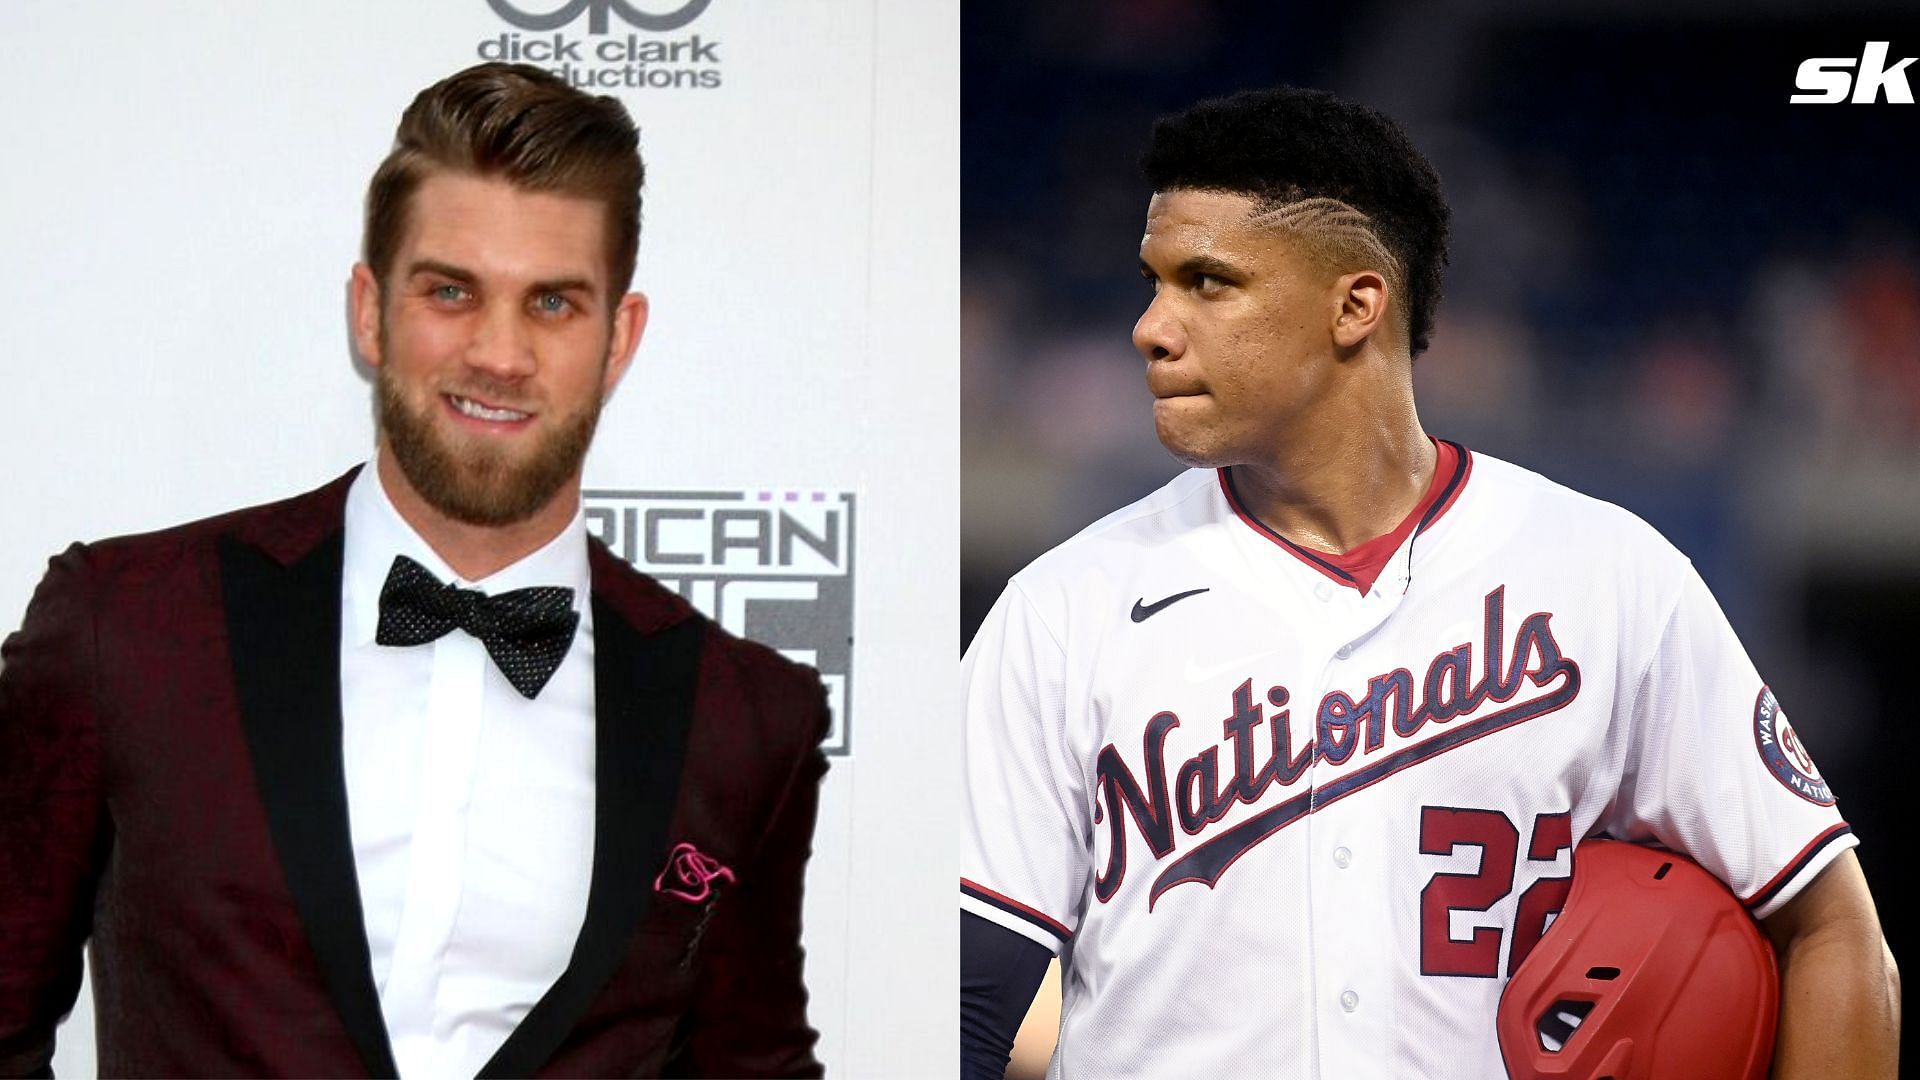 Ozzie on X: Bryce Harper — MVP One of my favorite players and